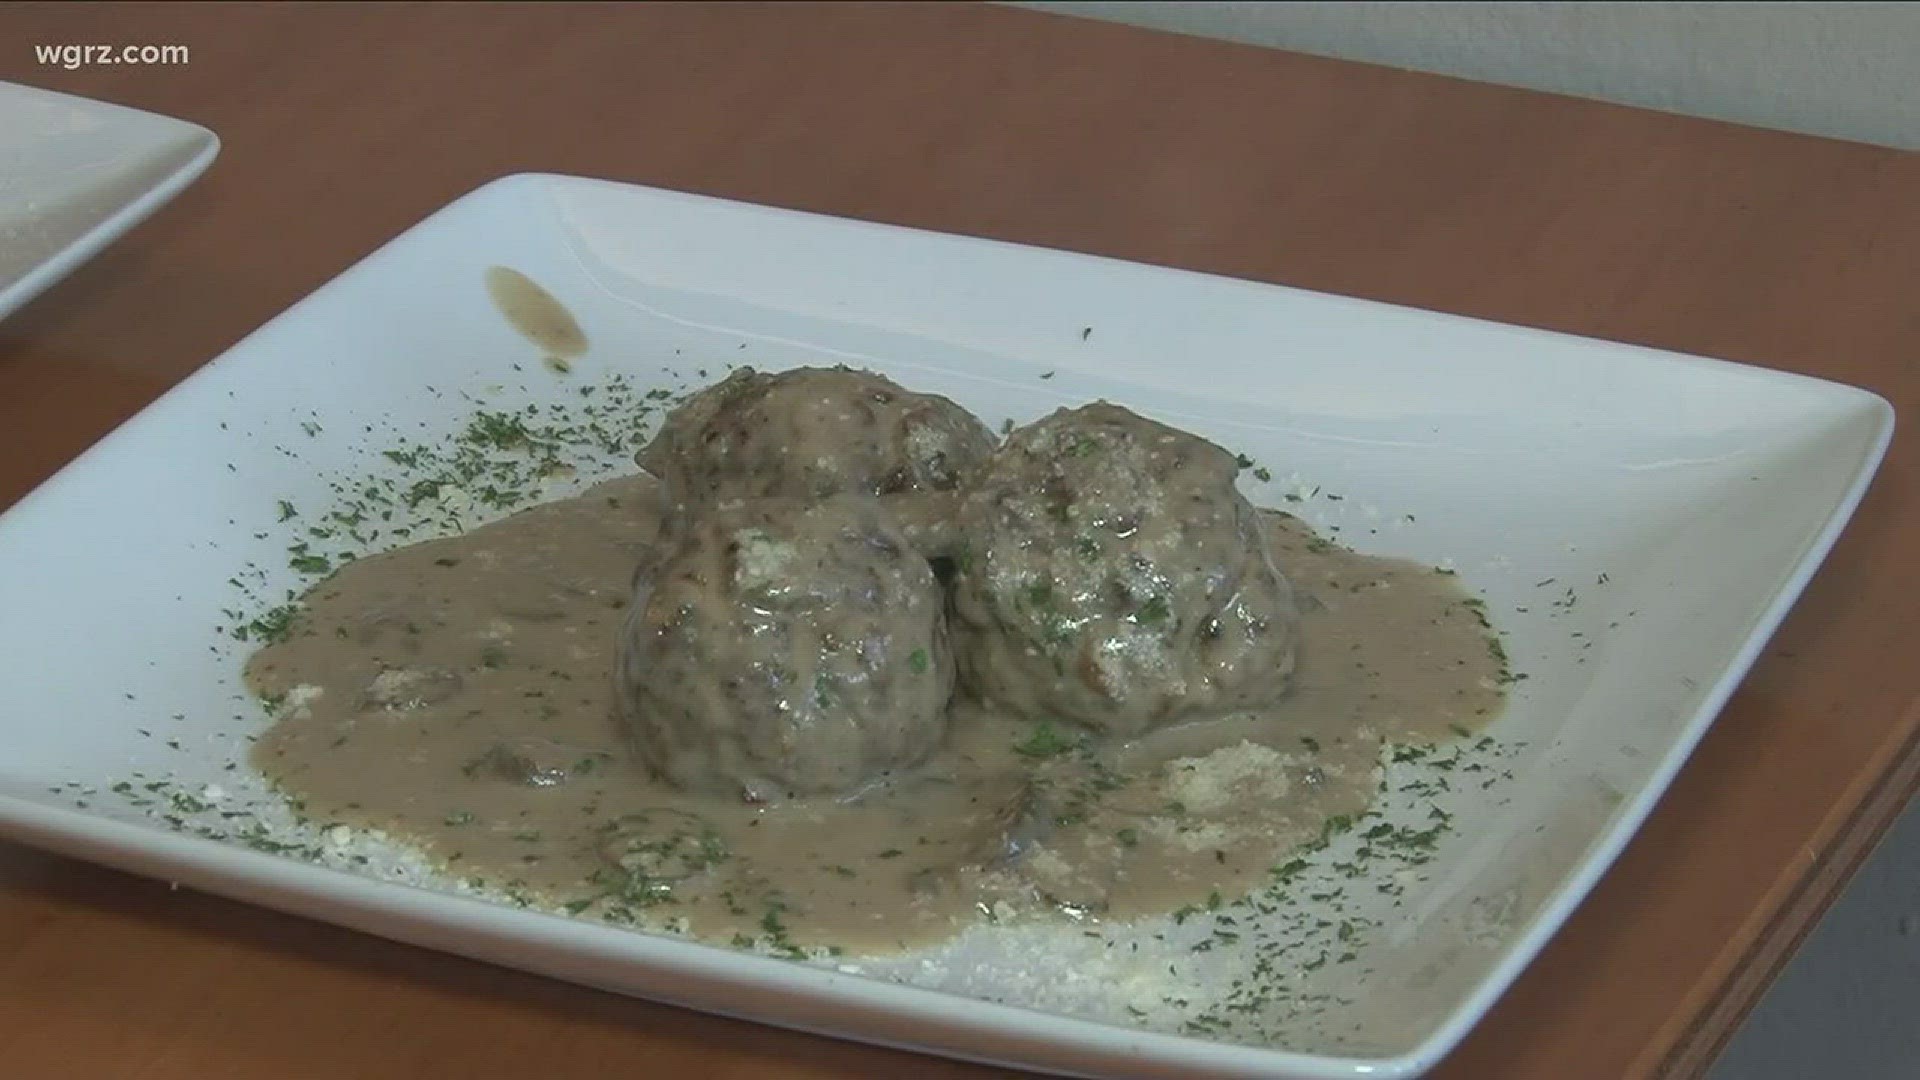 Daybreak's Stephanie Barnes shows us a market in Allentown that's all about the meatballs.